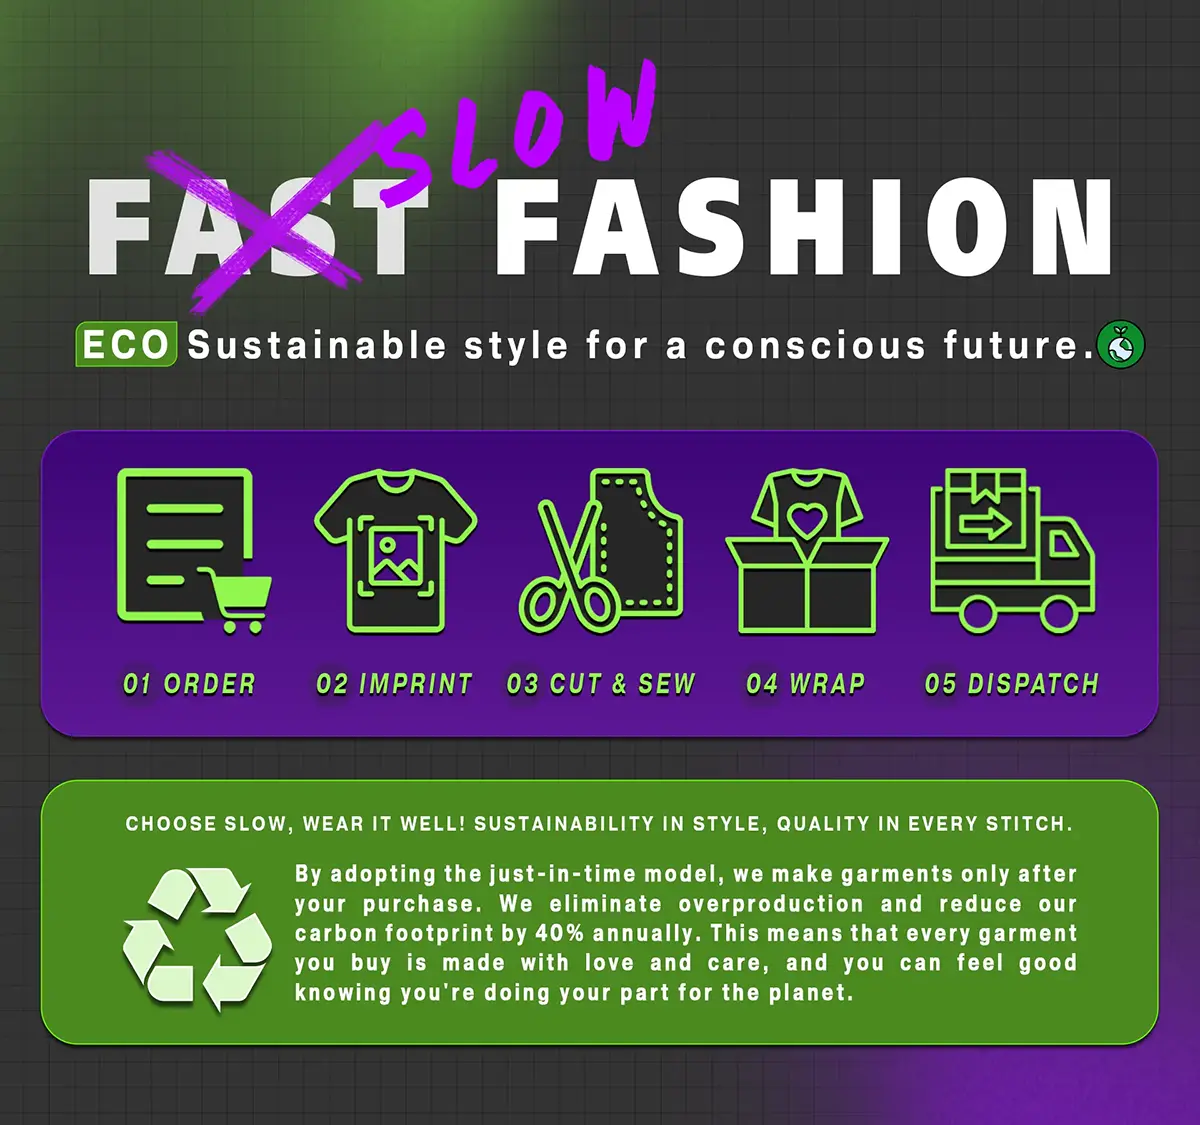 Slow Fashion Infographic - Sustainable Style for a Conscious Future. Steps from Order to Dispatch Highlighting Eco-Friendly Process with Recycling Symbol.